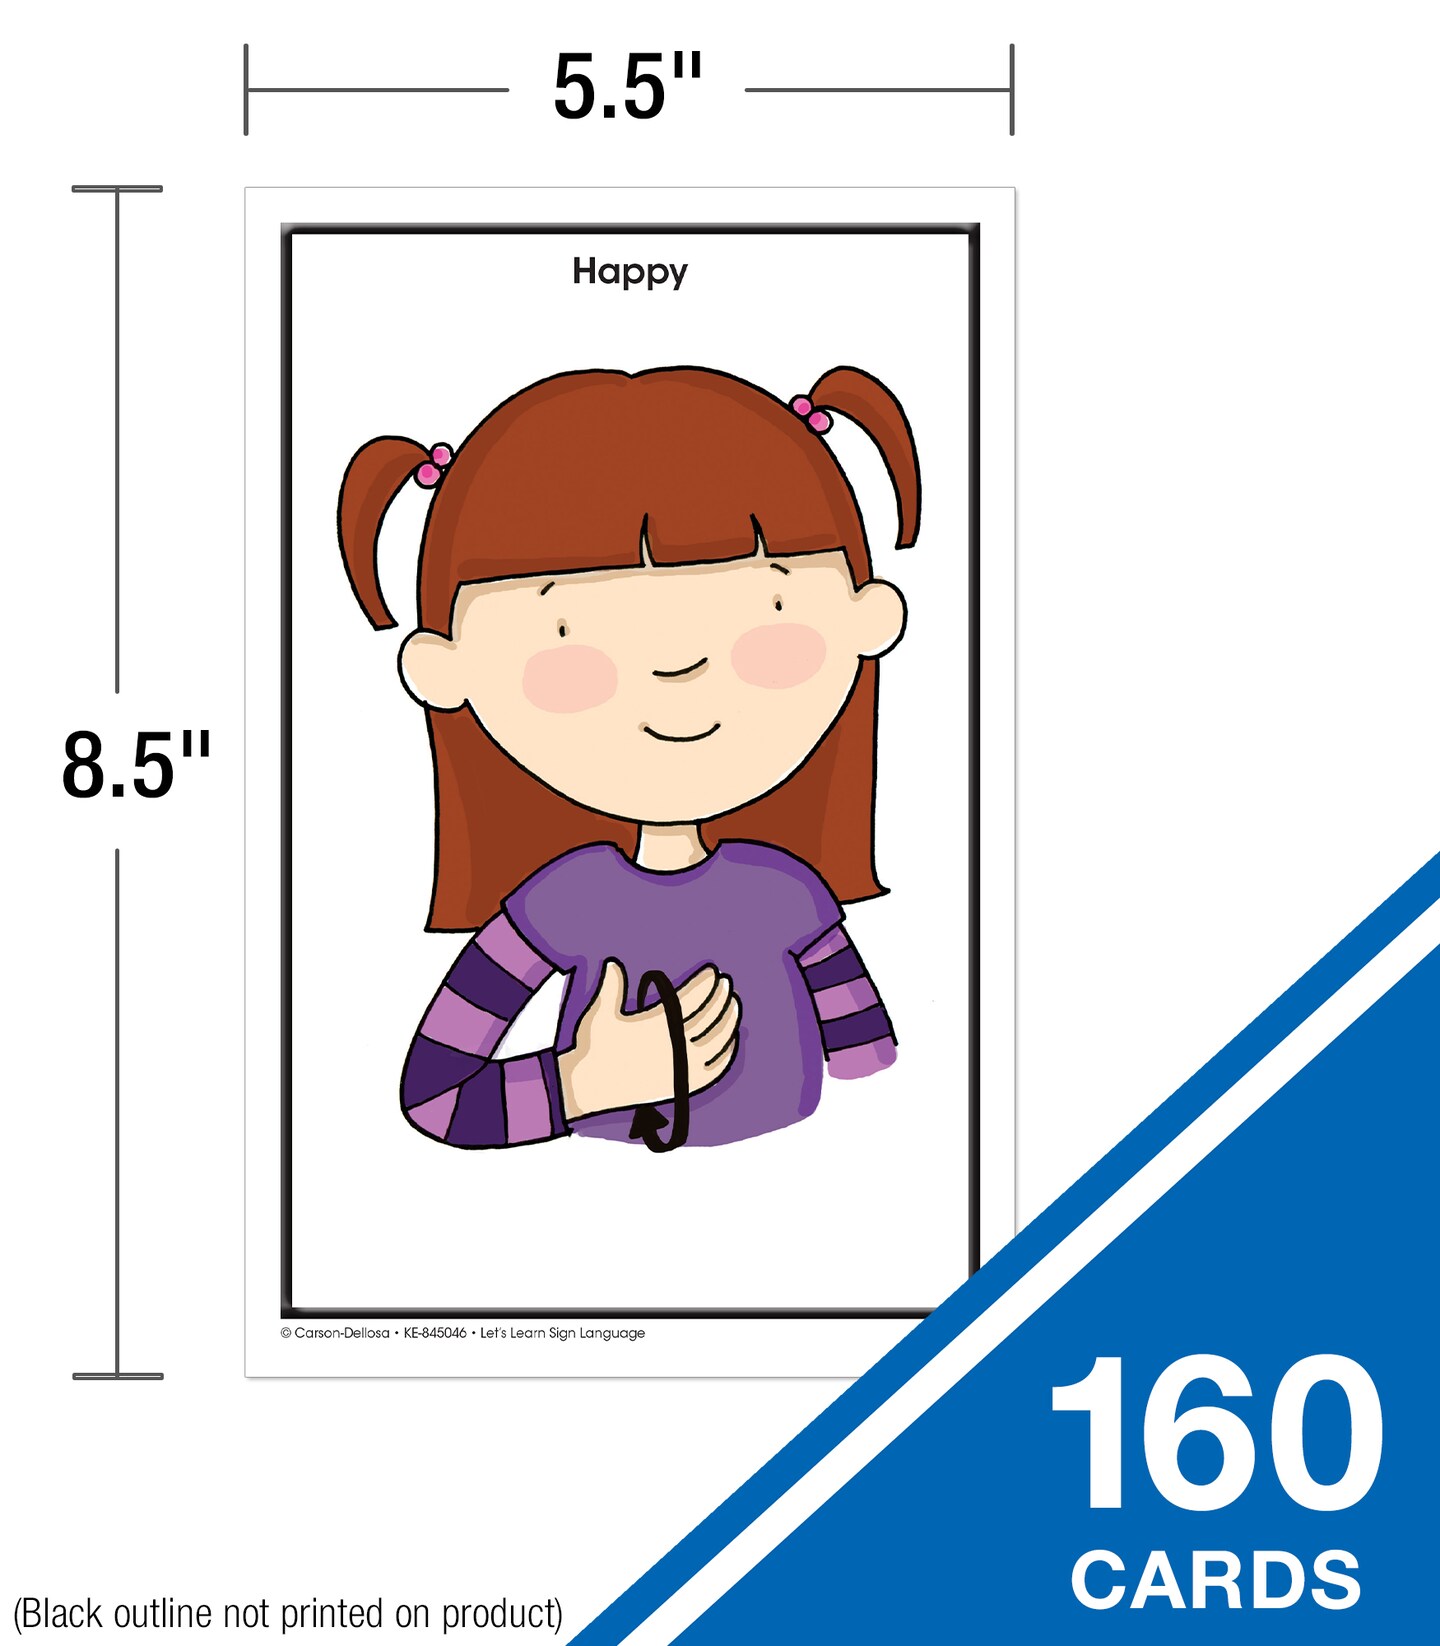 Key Education 160 American Sign Language Flash Cards for Kids, ASL Flash Cards for Kids PreK&#x2013;Grade 2, ASL Cards for Beginners Covering 160 Sight Words, Alphabet, Numbers, Emotions, and More ASL Signs